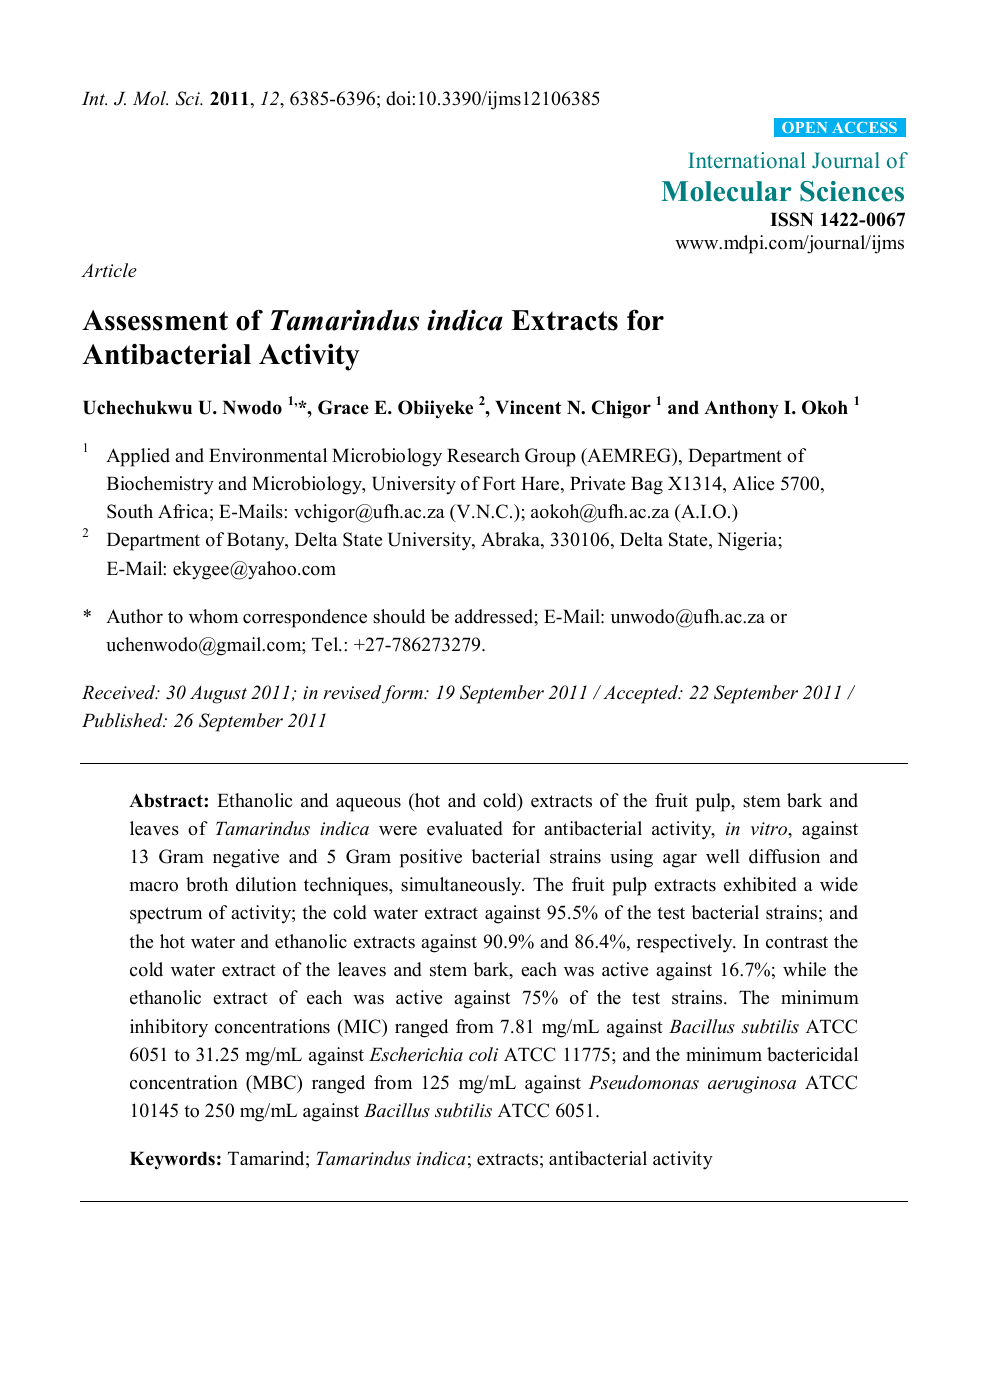 Assessment Of Tamarindus Indica Extracts For Antibacterial Activity Topic Of Research Paper In Biological Sciences Download Scholarly Article Pdf And Read For Free On Cyberleninka Open Science Hub